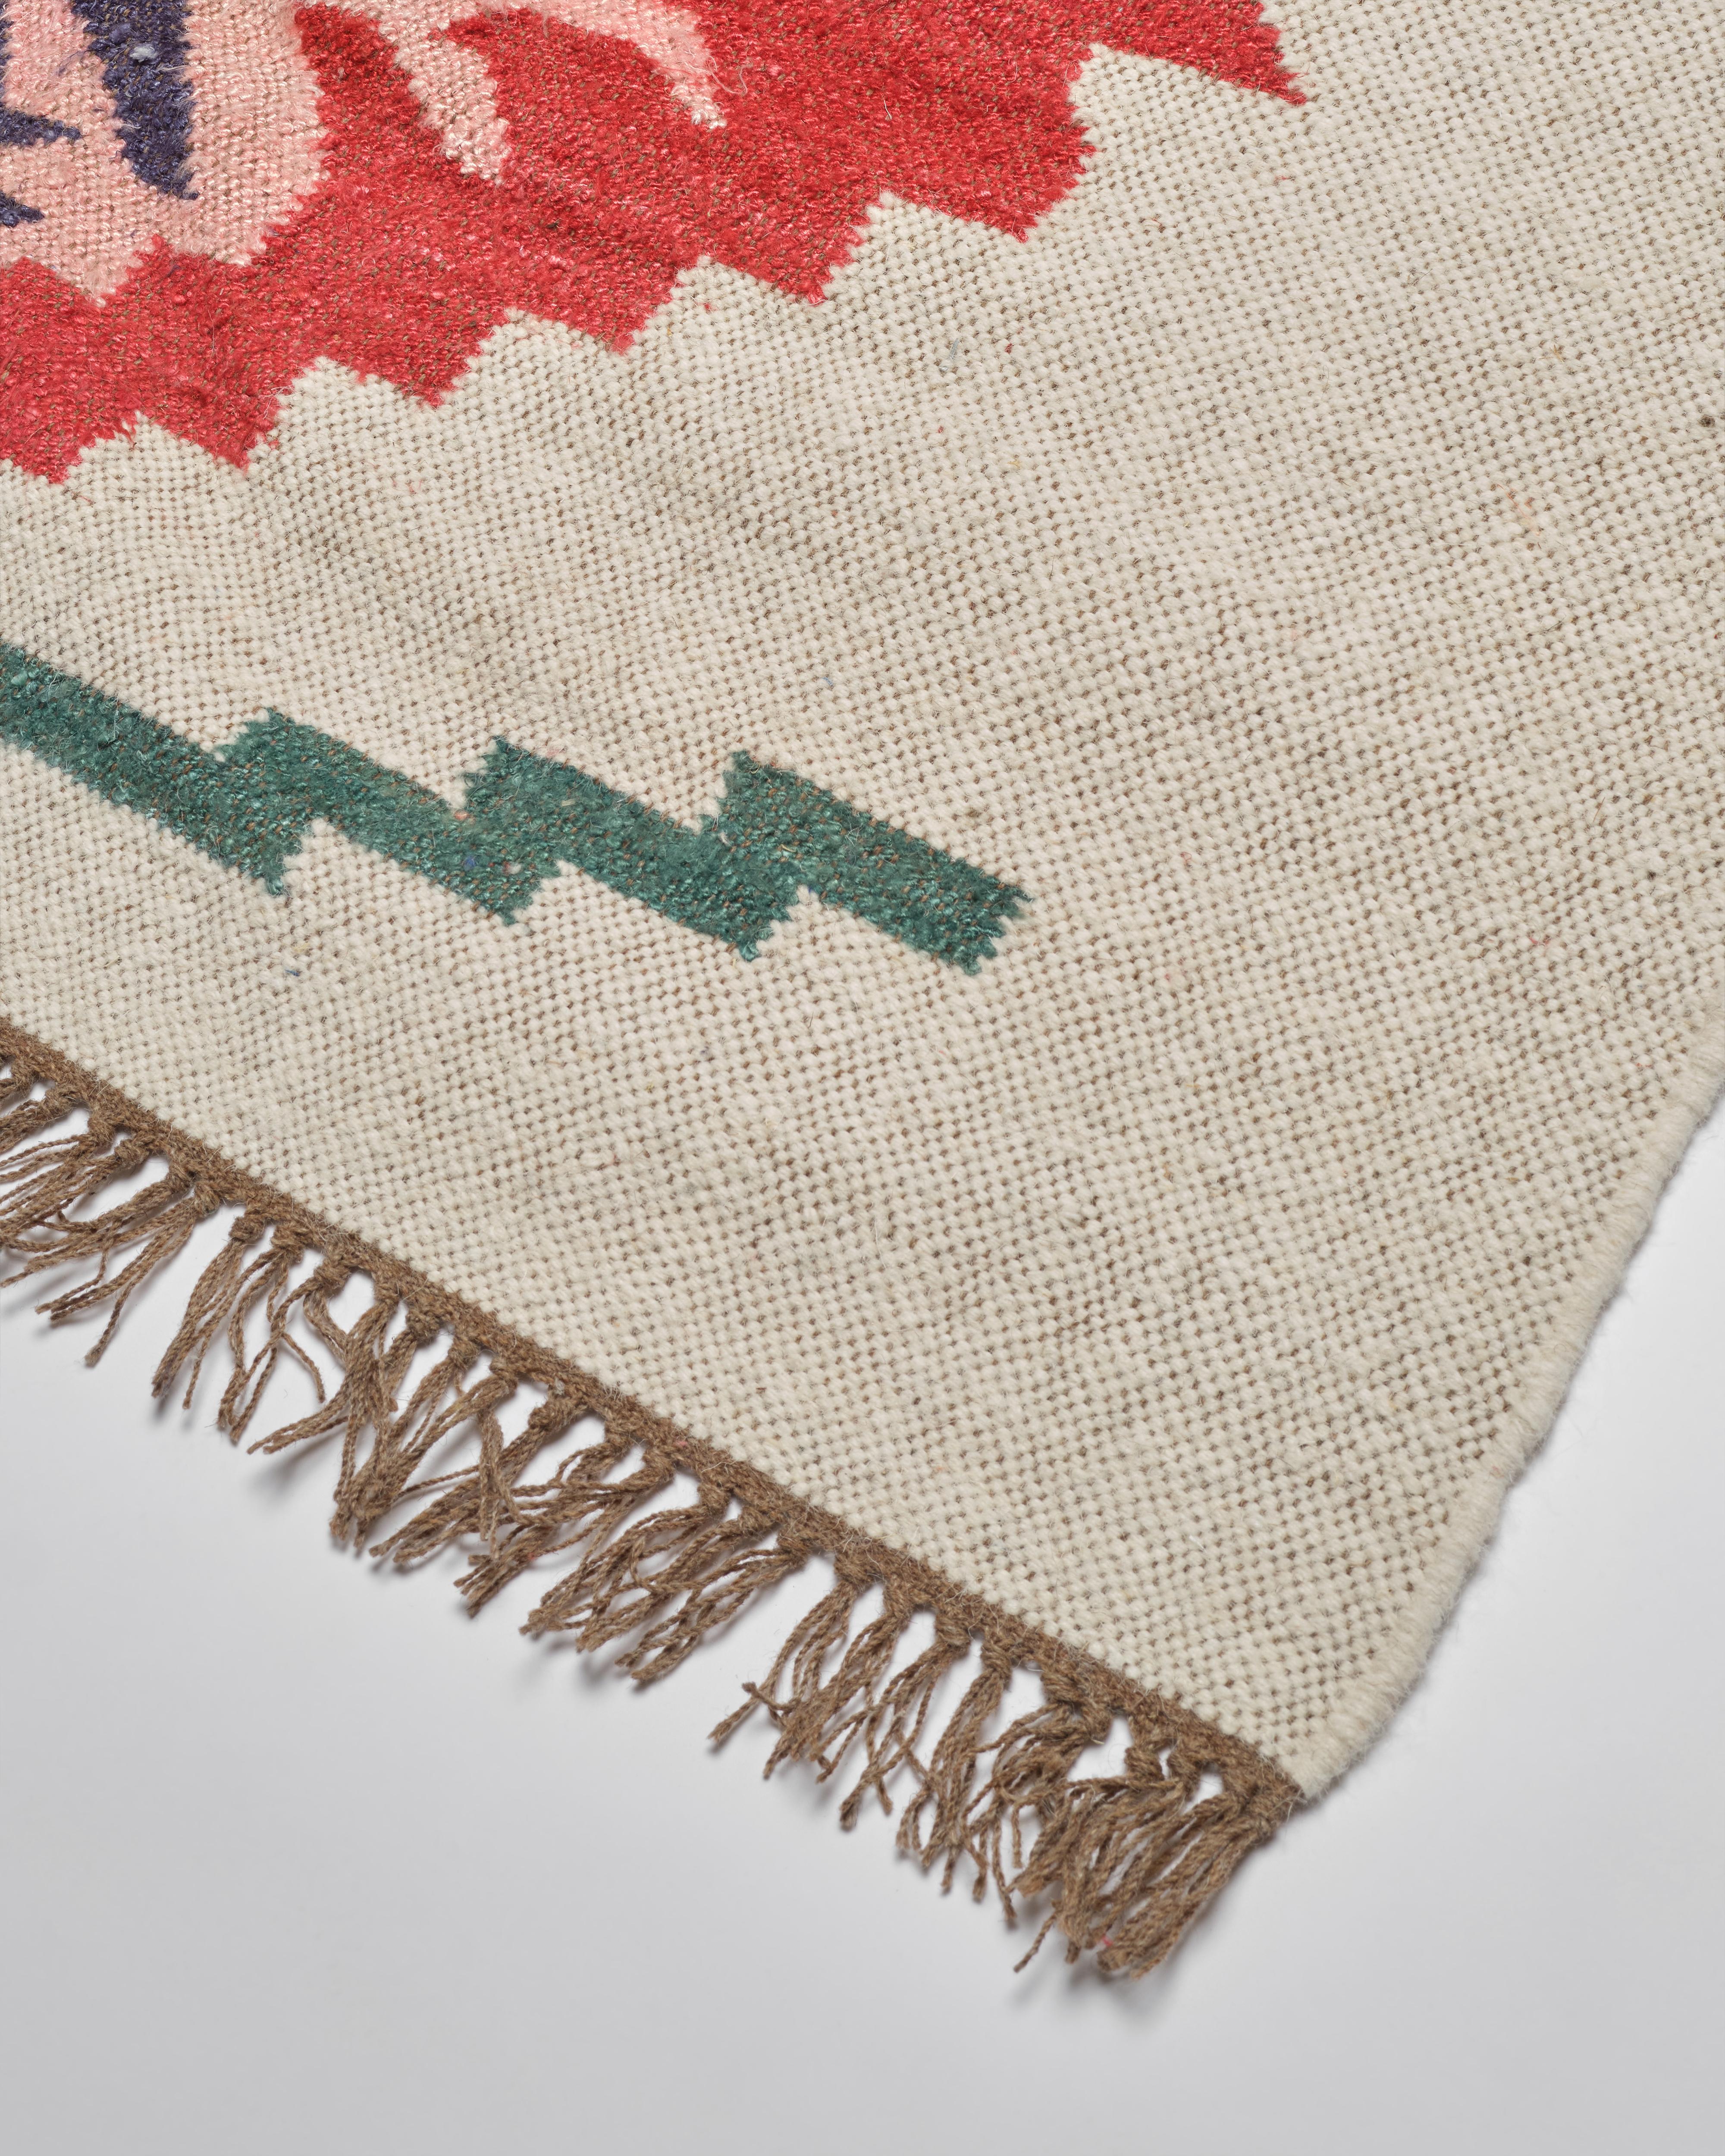 Our beautiful banana silk and jute rugs are expertly handwoven in Jaipur, India. The soft banana silk and wool combination is woven into a beautiful, floral motif, a perfect splash of color. The flat weave is perfect for layering or on its own.